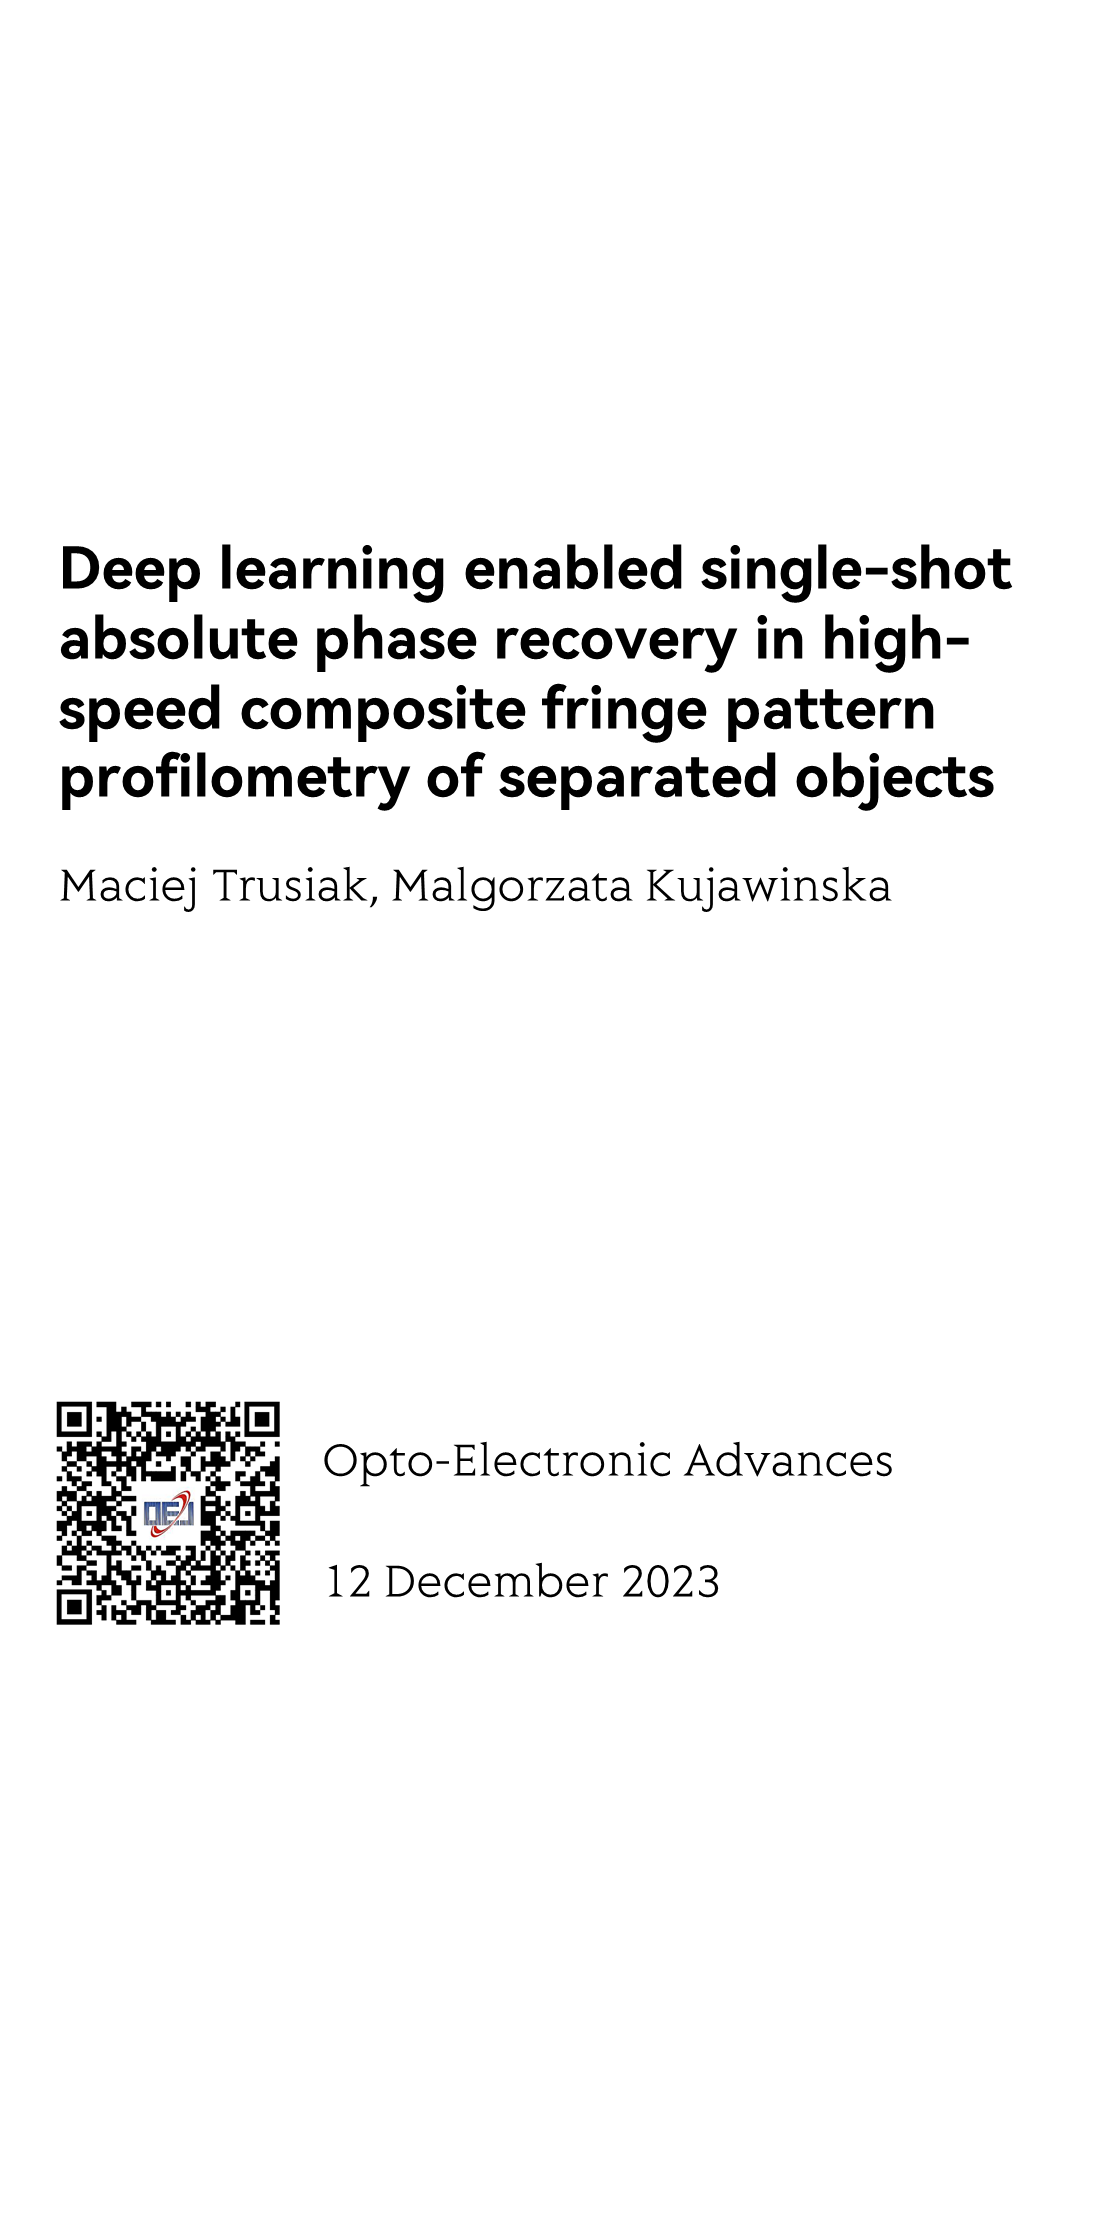 Deep learning enabled single-shot absolute phase recovery in high-speed composite fringe pattern profilometry of separated objects_1